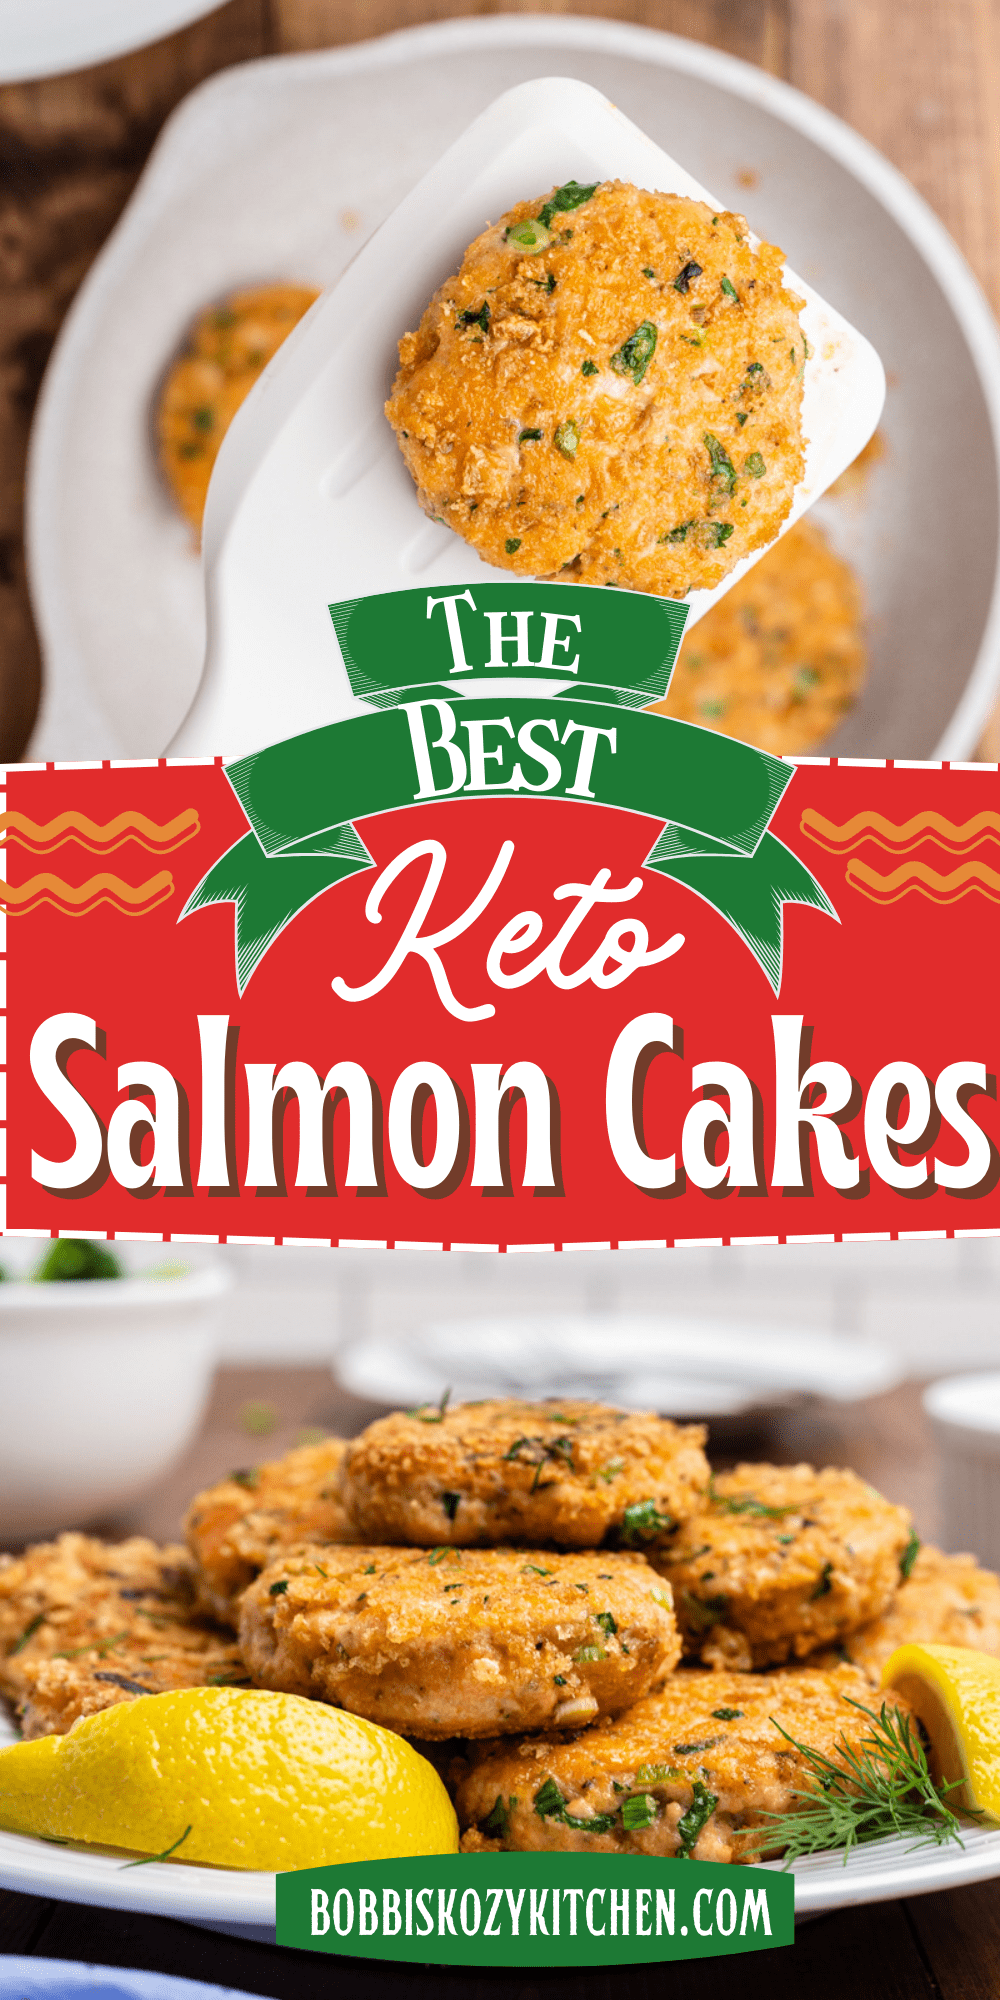 Pinterest graphic with images of keto salmon cakes (salmon patties) on it.